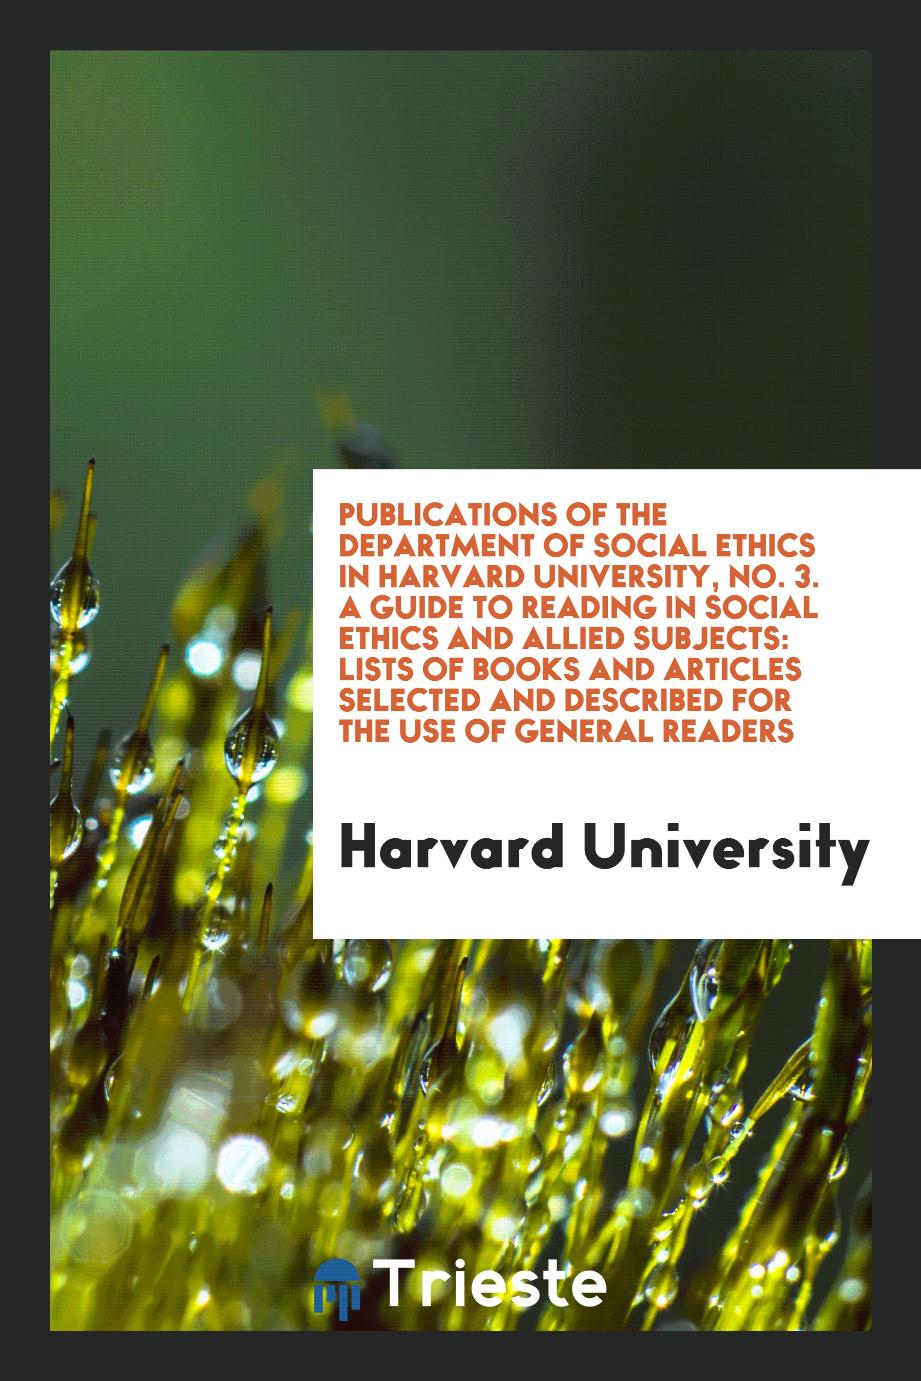 Publications of the Department of Social Ethics in Harvard University, No. 3. A Guide to Reading in Social Ethics and Allied Subjects: Lists of Books and Articles Selected and Described for the Use of General Readers